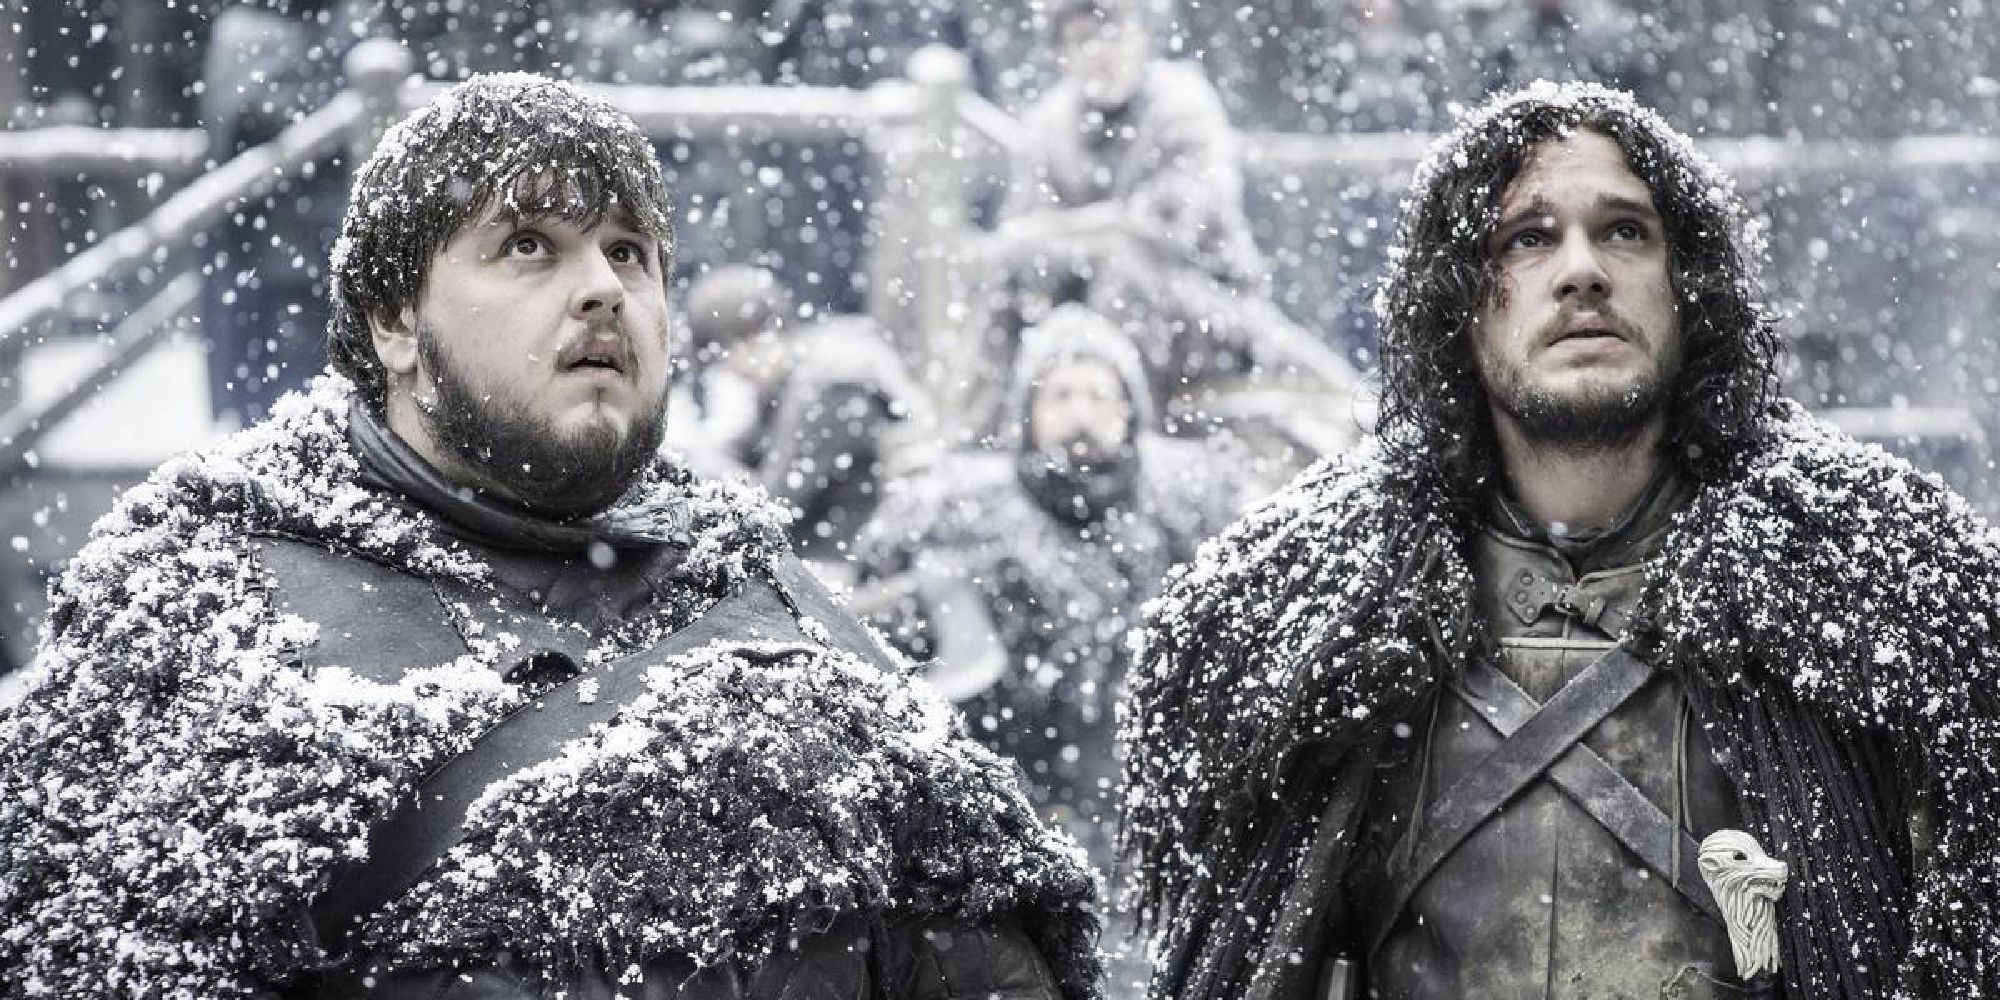 Jon Snow standing in the courtyard of Castle Black with Samwell Tarly as it snows